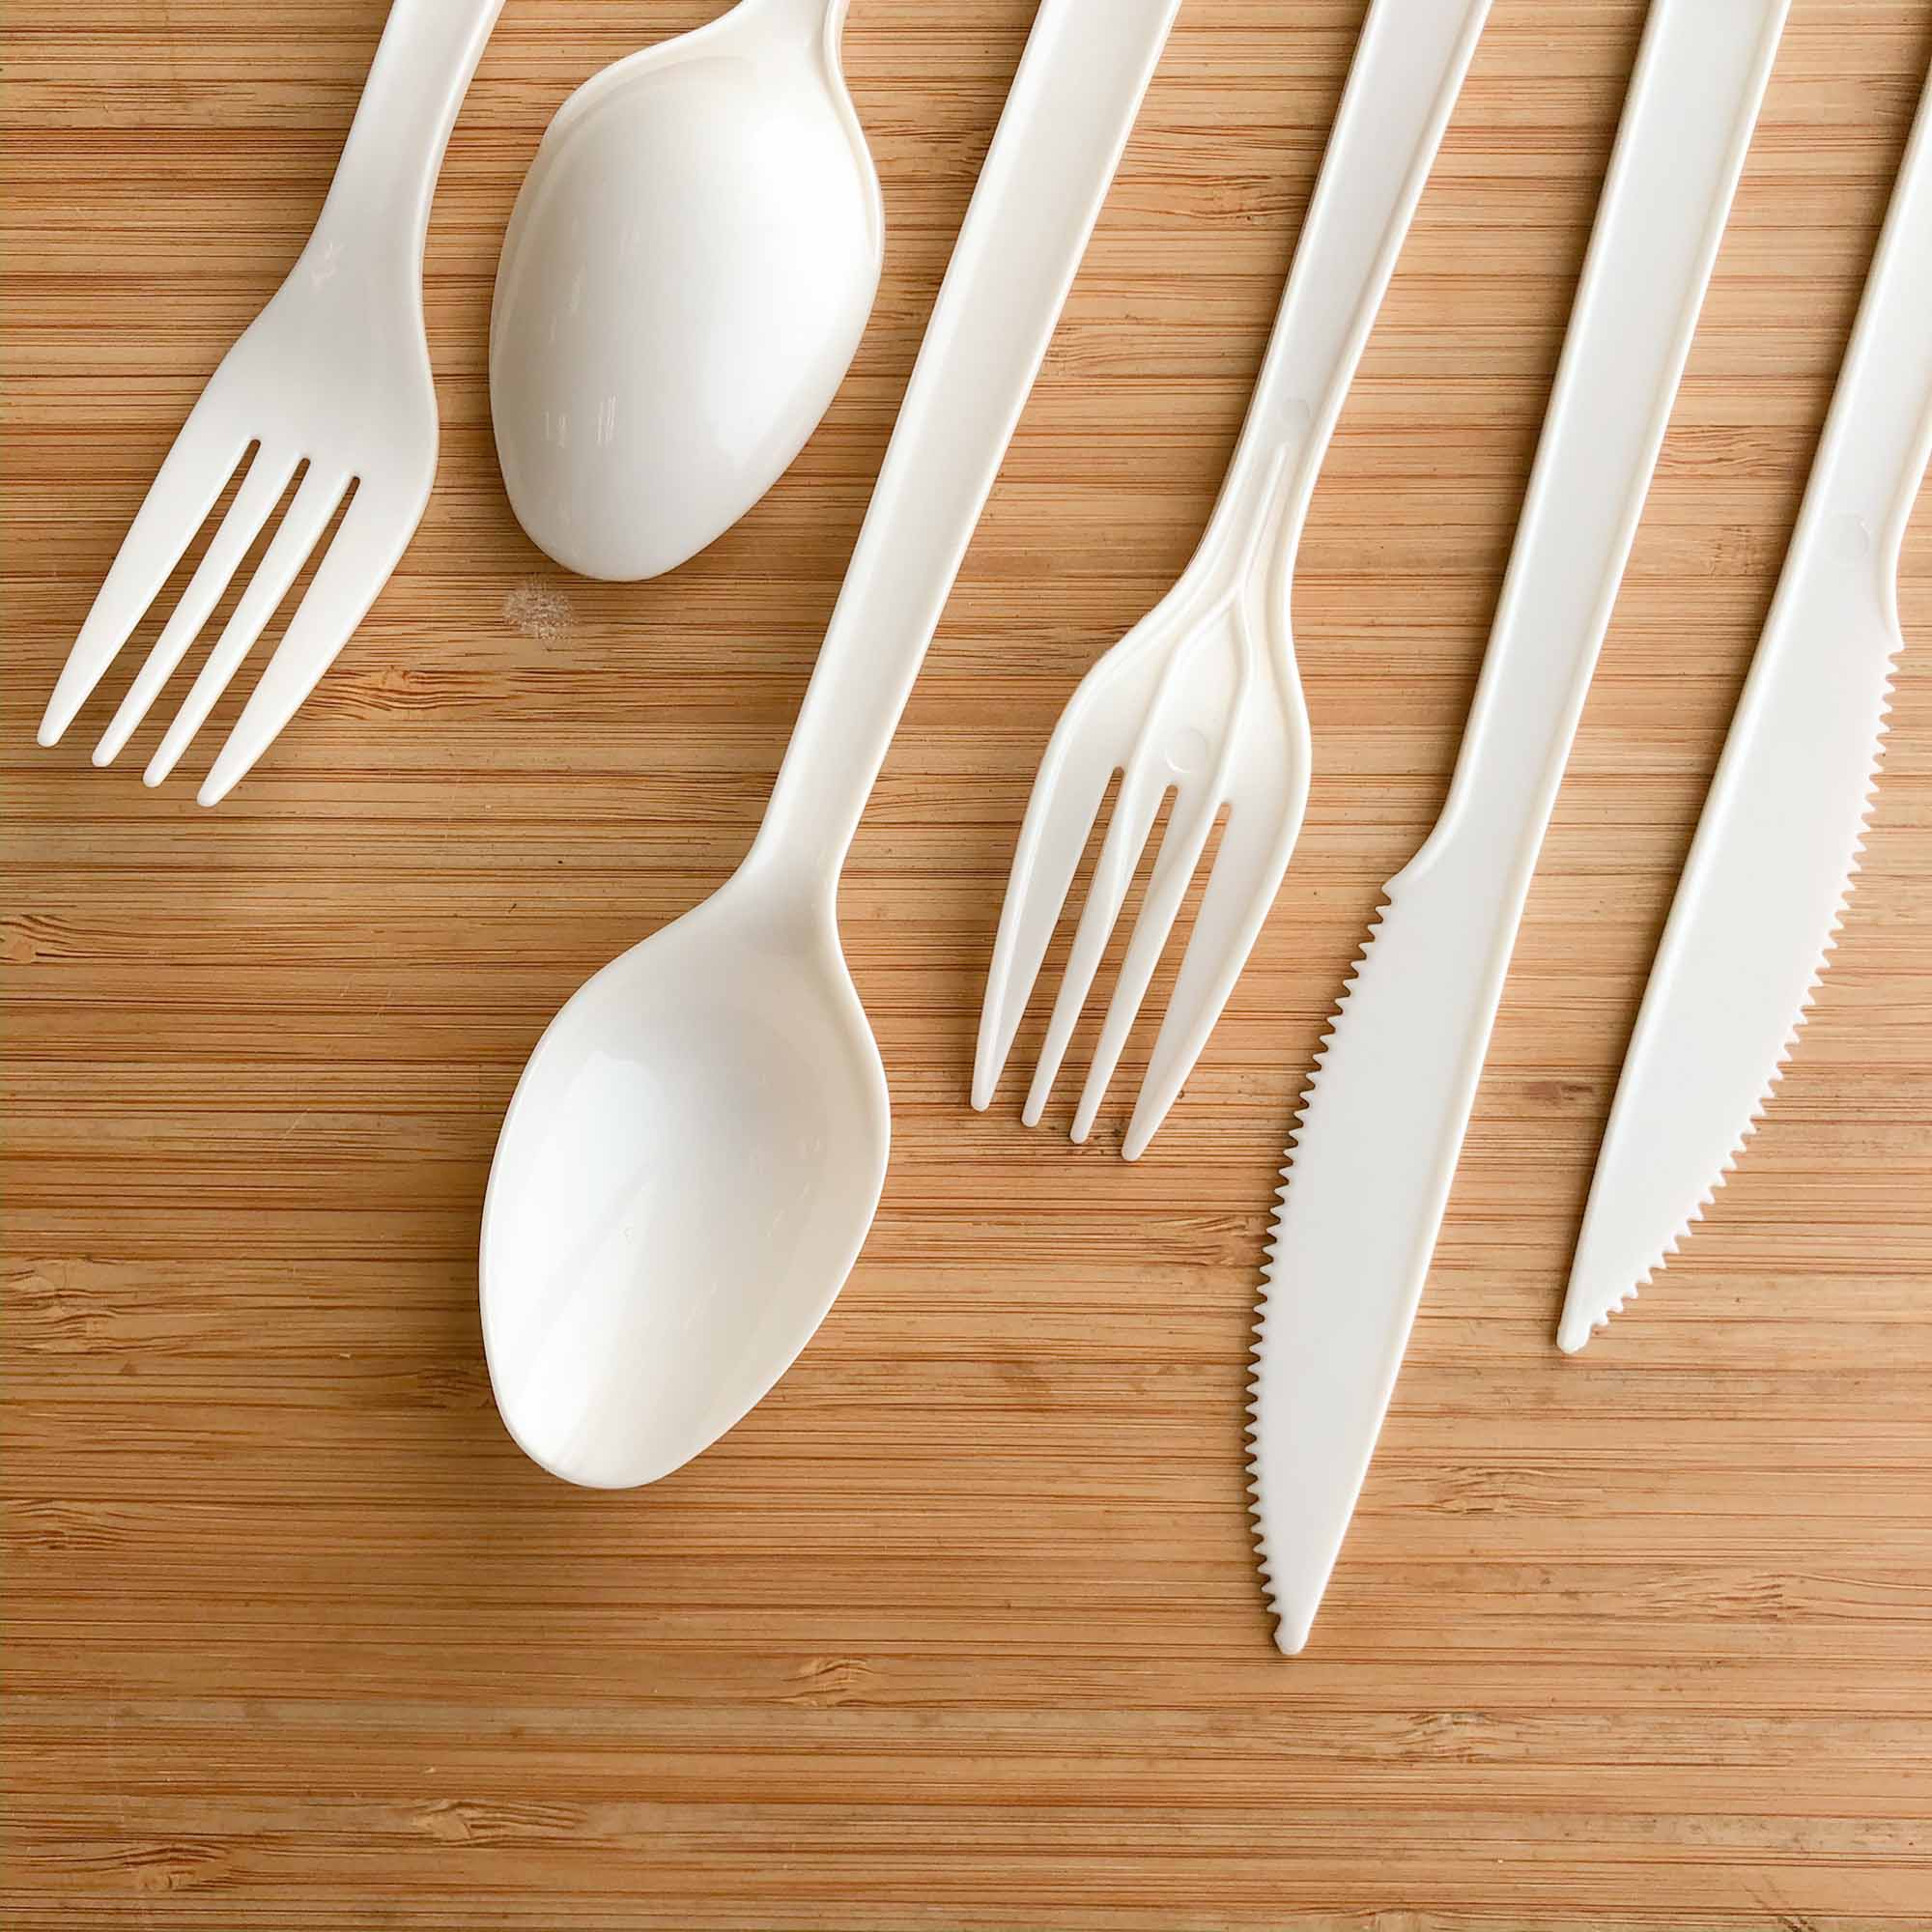 The 16.5cm CPLA cutlery is real compostable cutlery that it has BPI certification.